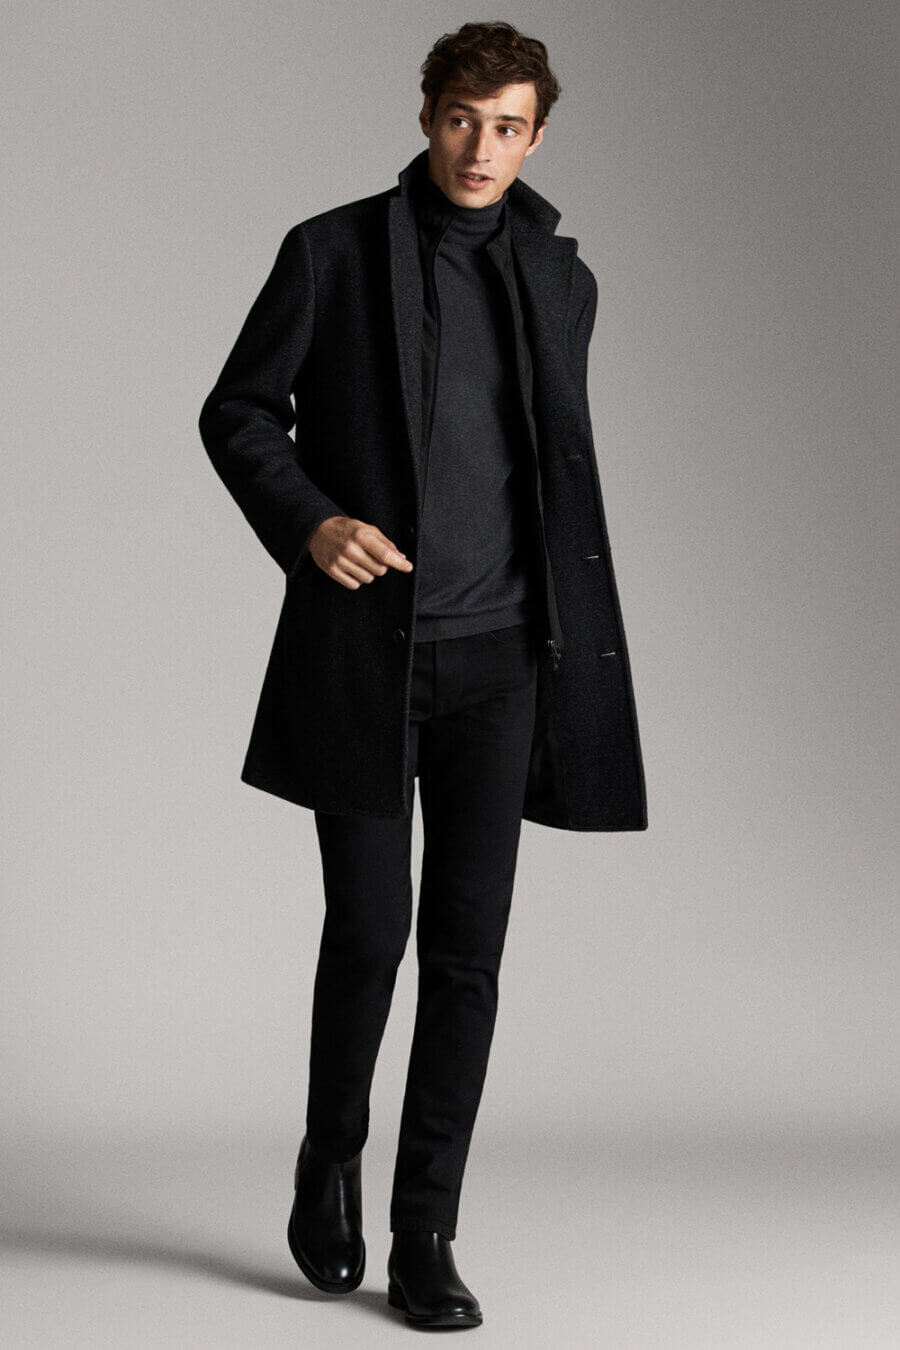 Men's smart casual all black outfit with overcoat turtleneck, jeans and boots